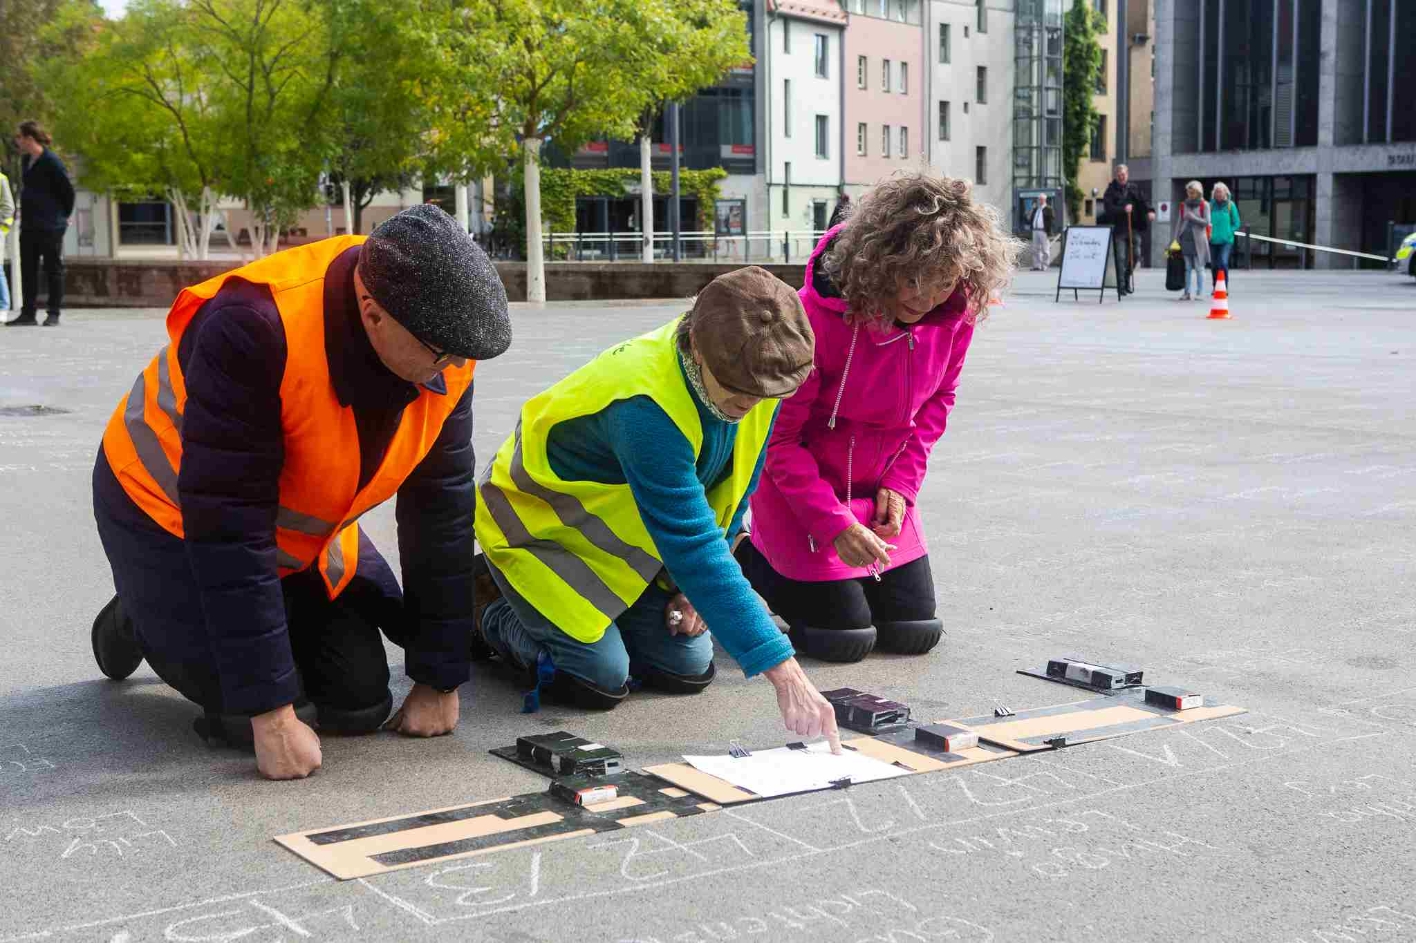 The Lantag president Birgit Pommer kneels on the left and wears a pink anorak. Margarete Rabow kneels to her left and wears a yellow high-visibility vest. In front of them on the floor stencils and chalk writing.